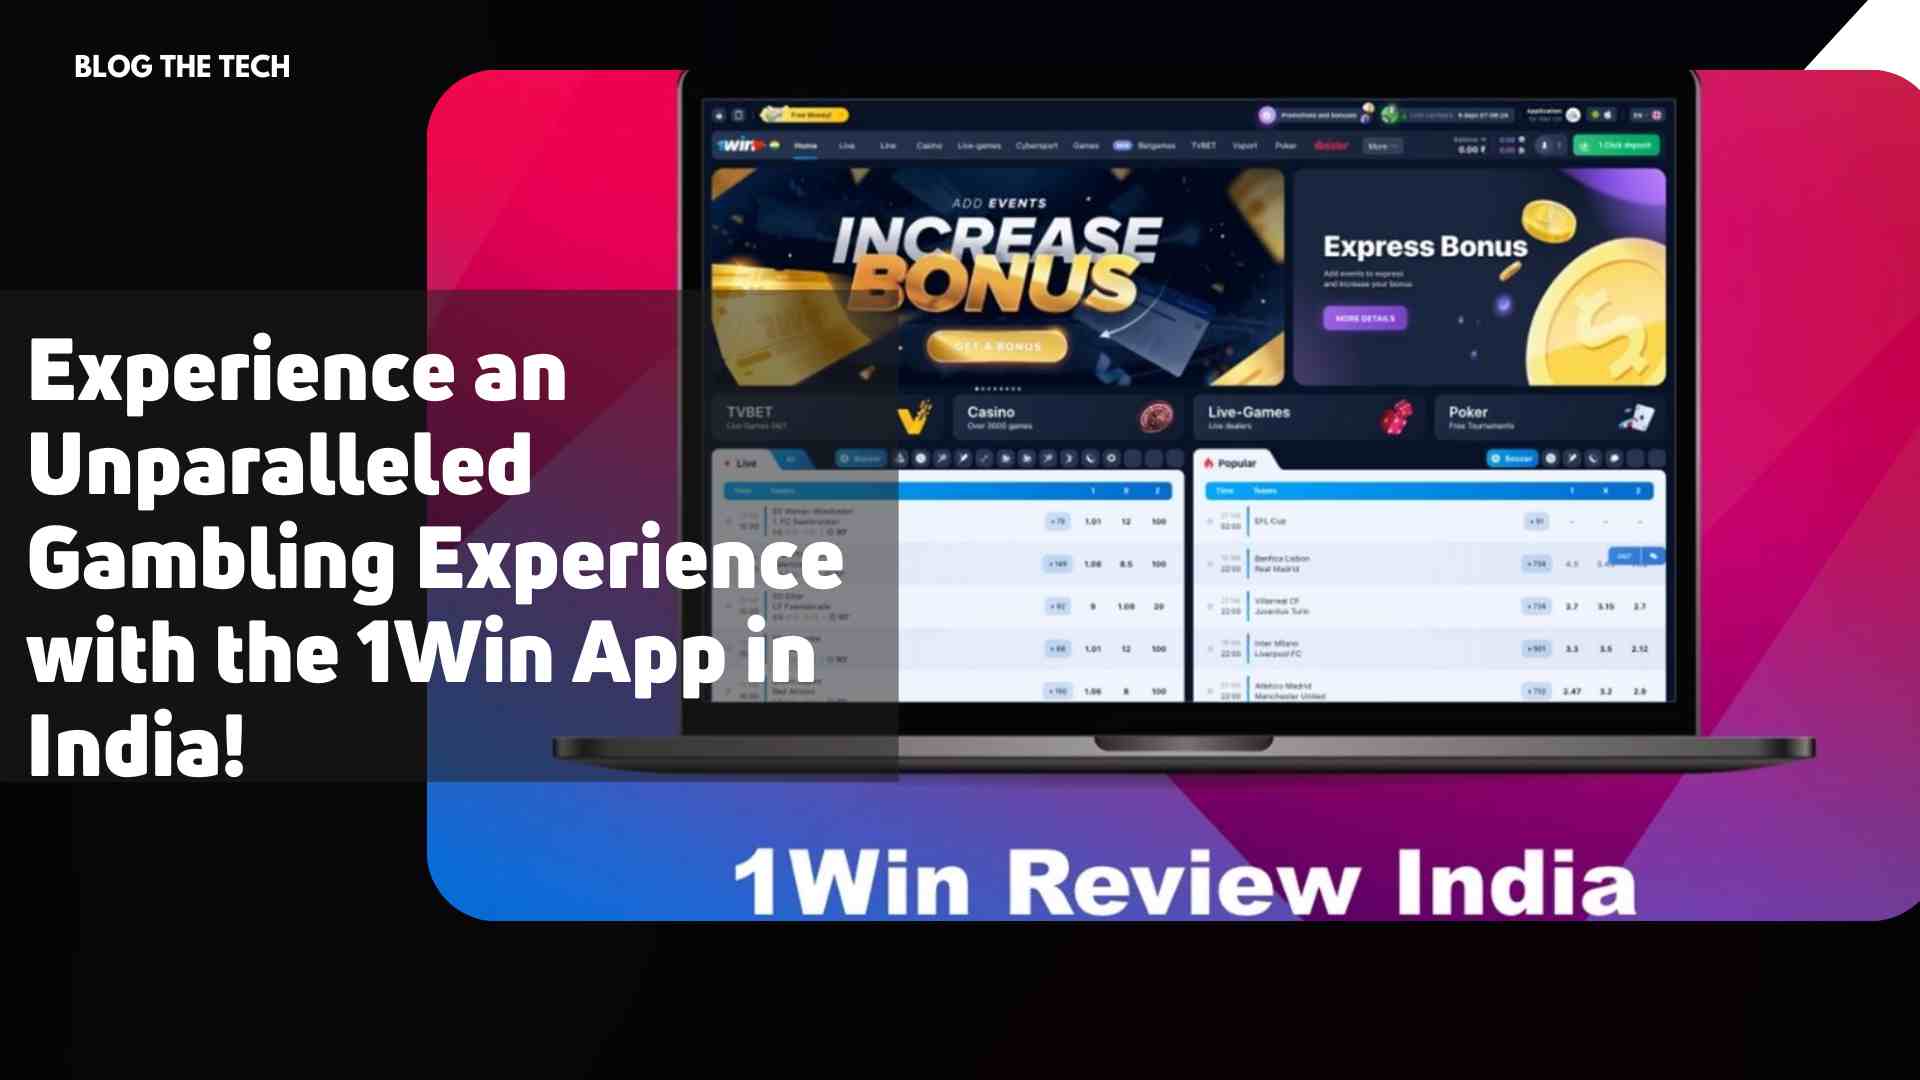 Experience an Unparalleled Gambling Experience with the 1Win App in India